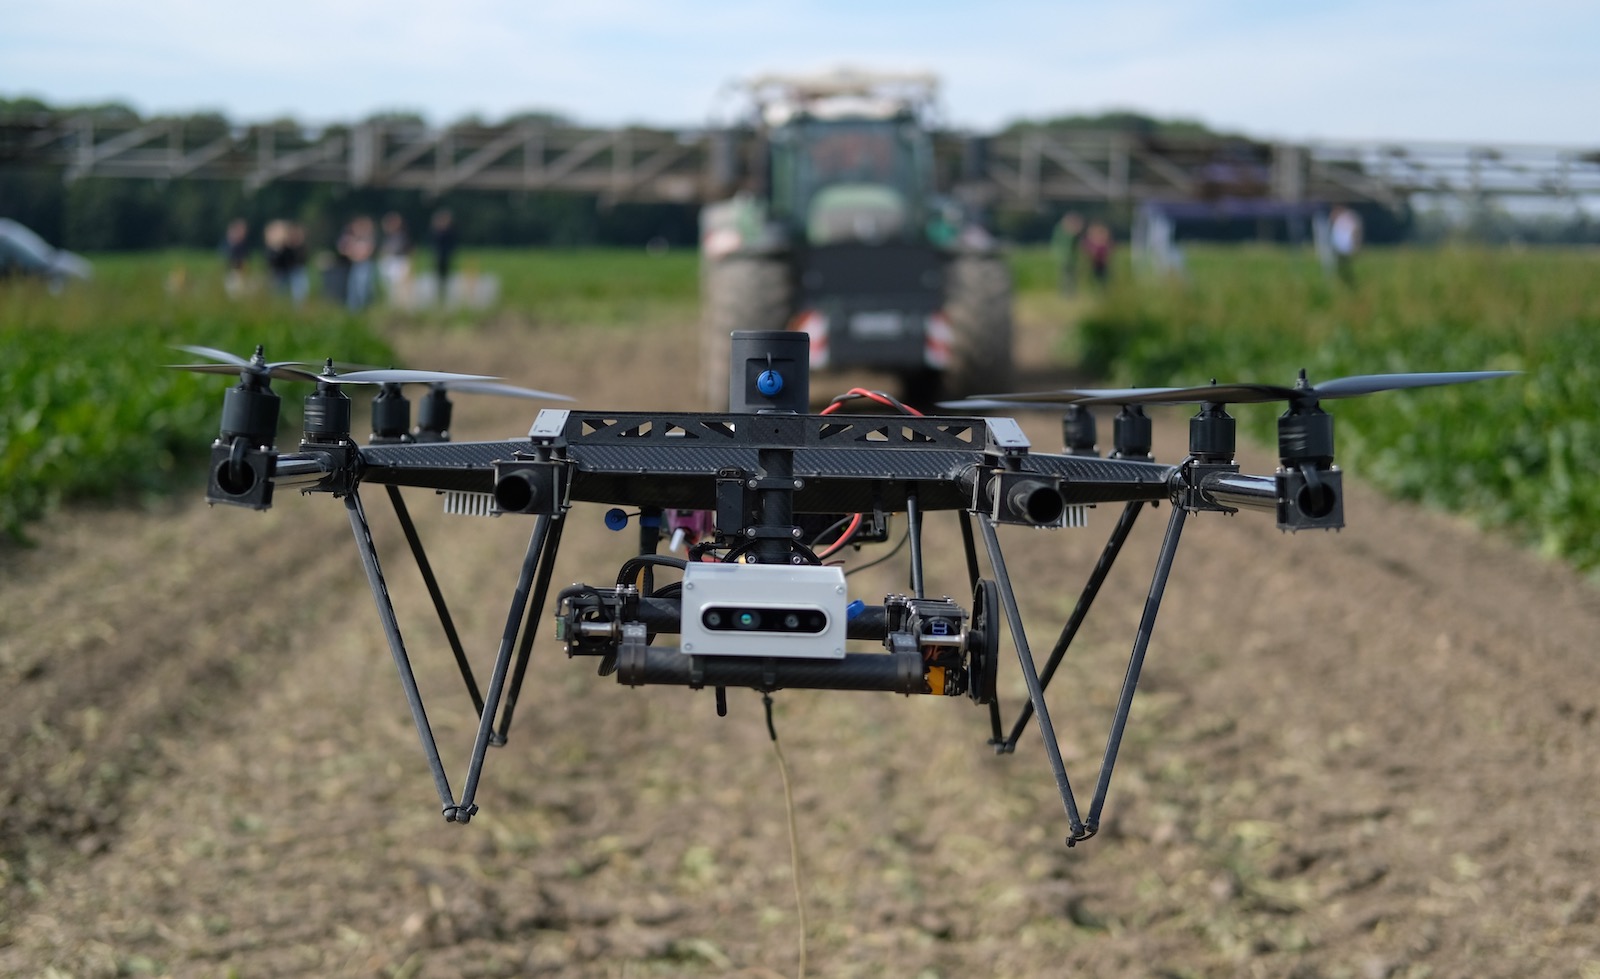 A drone hovers in front of a tractor with fertilizer equipment during a 2021 technology show in a field in northern Saxony. A multispectral camera on the drone detects the fertilizer needs of the arable plants.